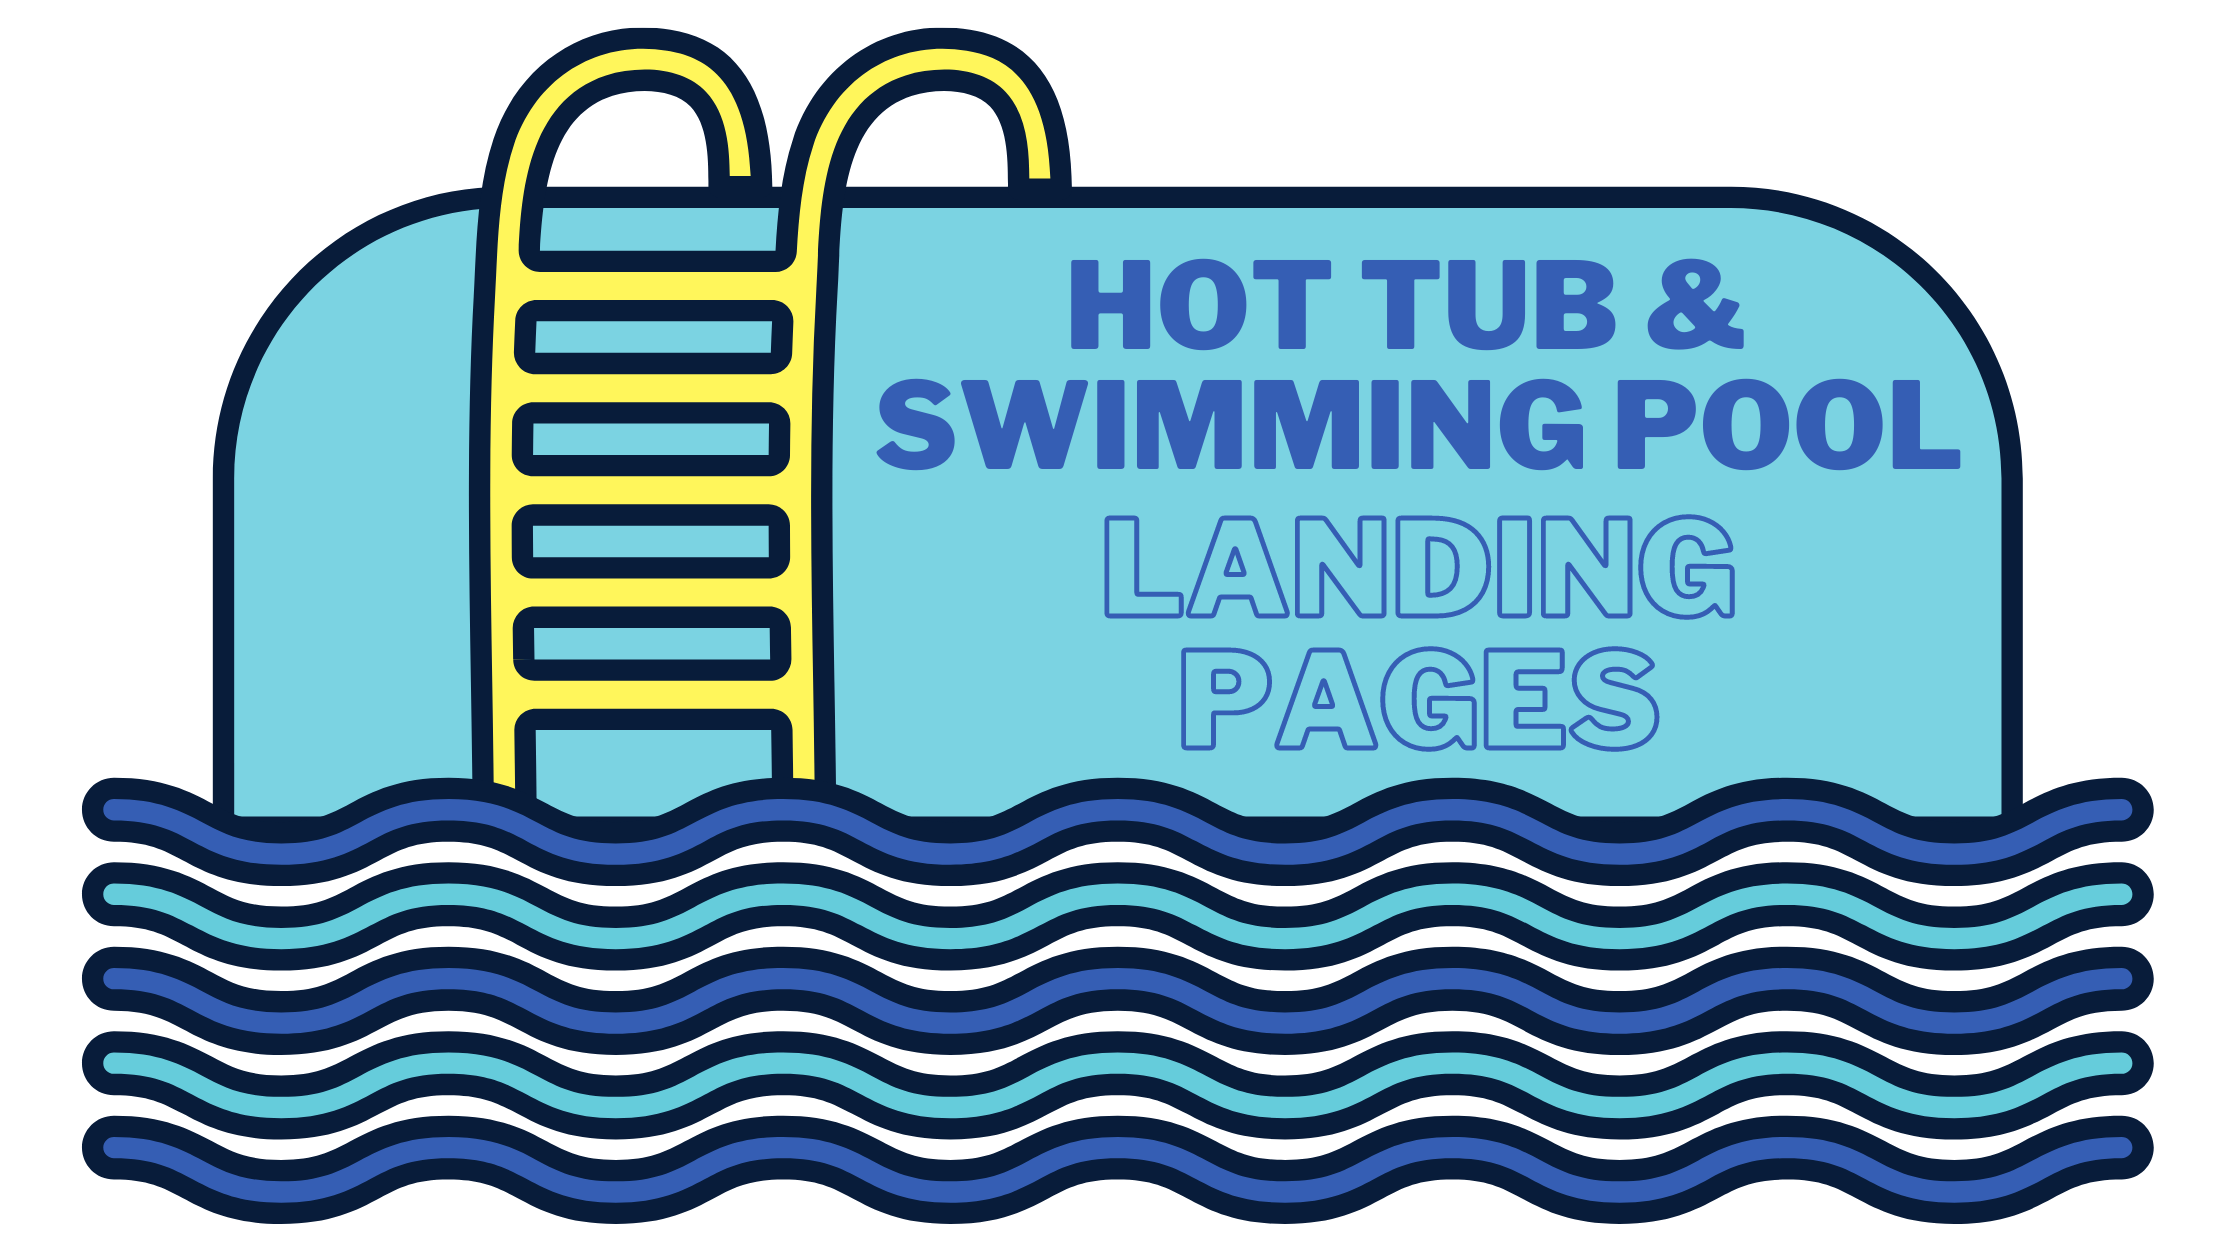 Hot tub and swimming pool landing pages